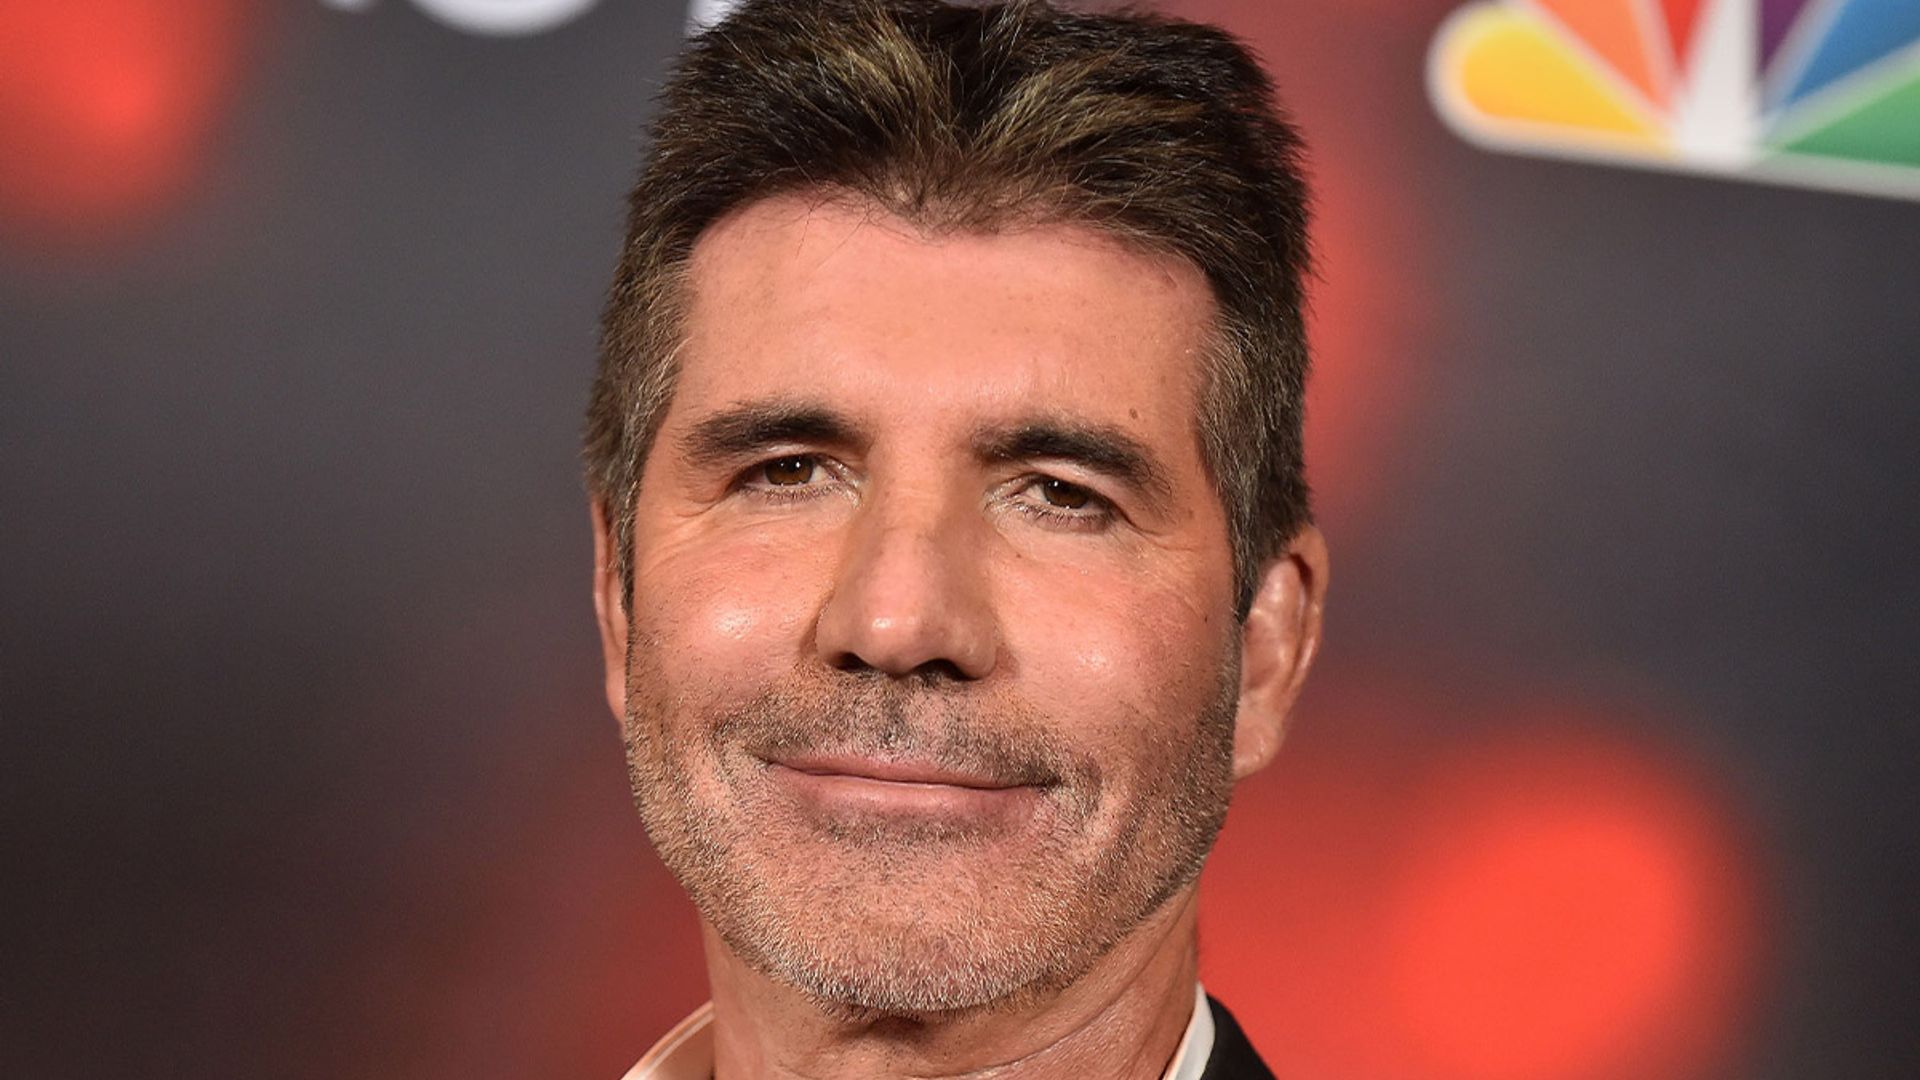 Simon Cowell’s grand home with fiancée is rarely pictured for unnerving reason